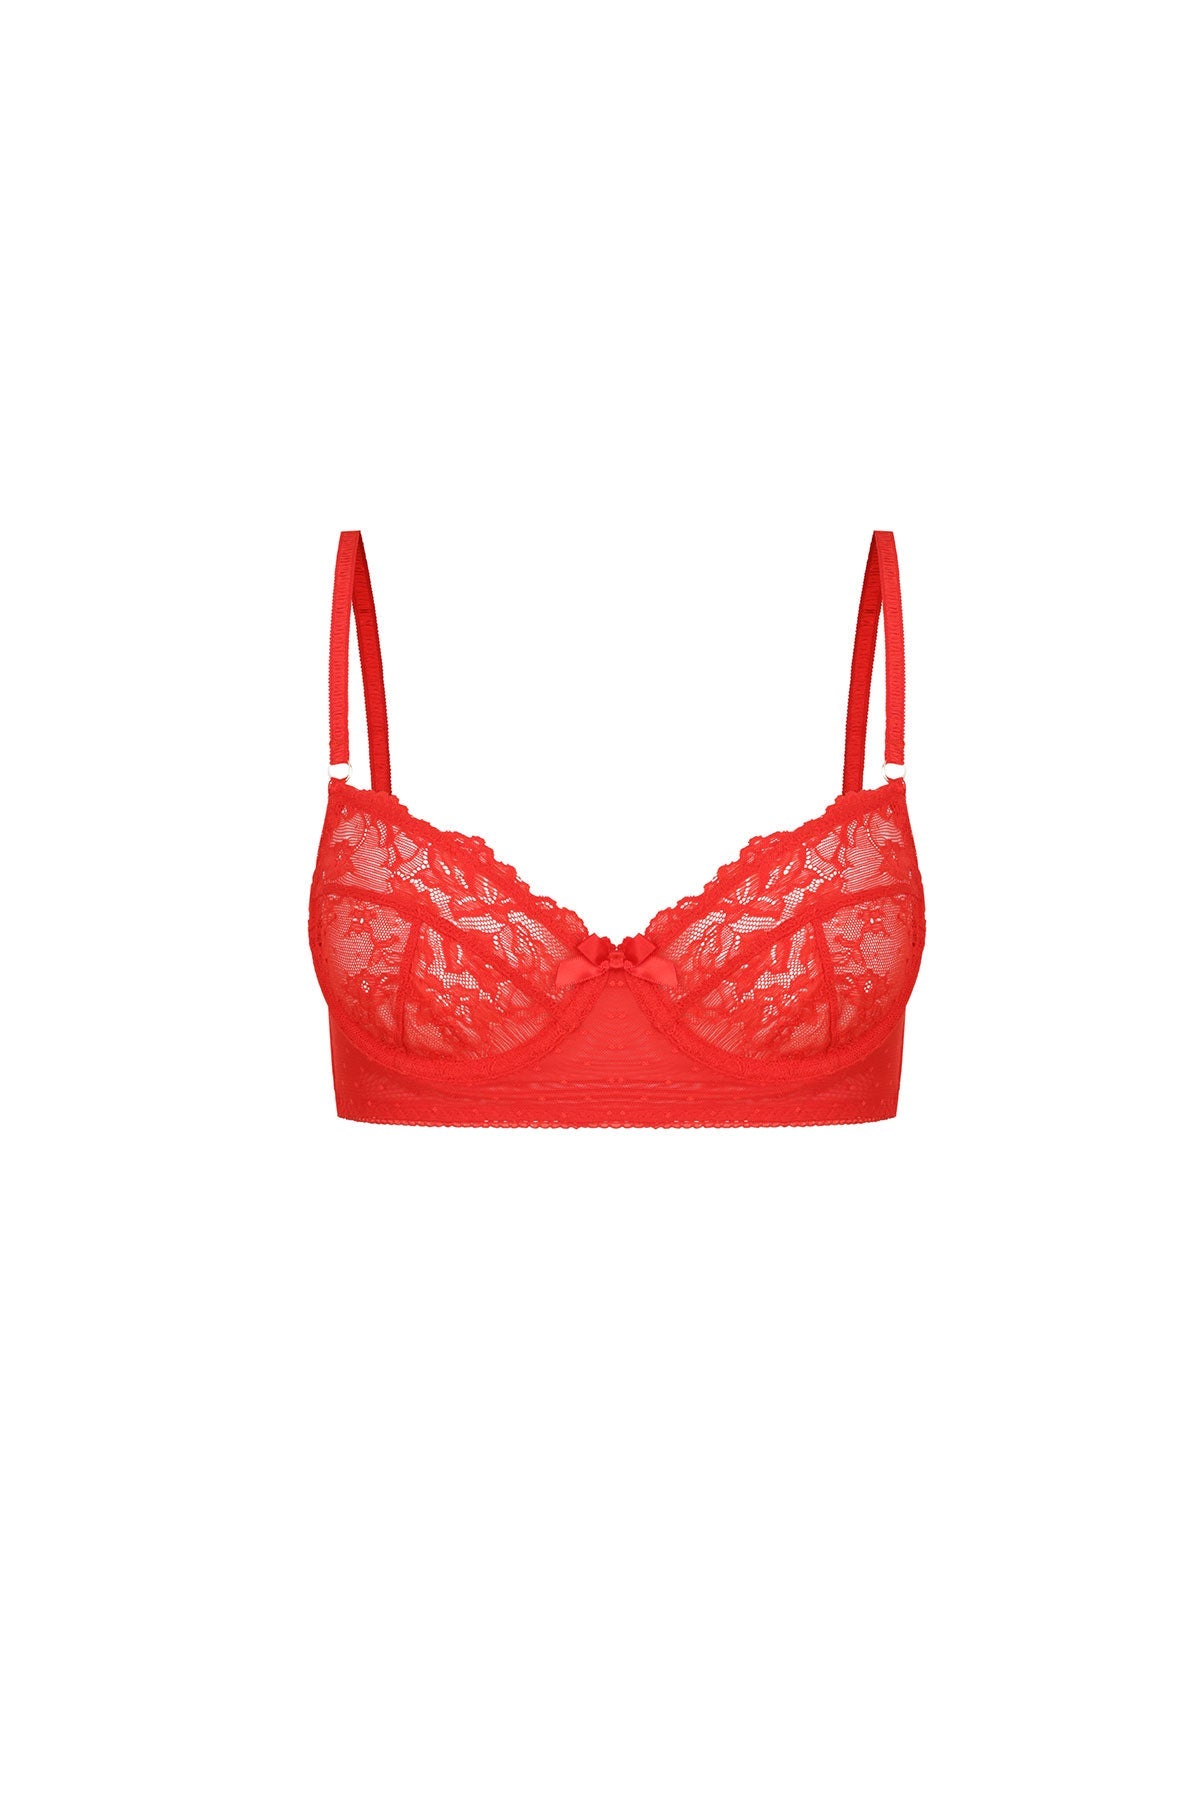 Red Lace bra, Sexy lingerie